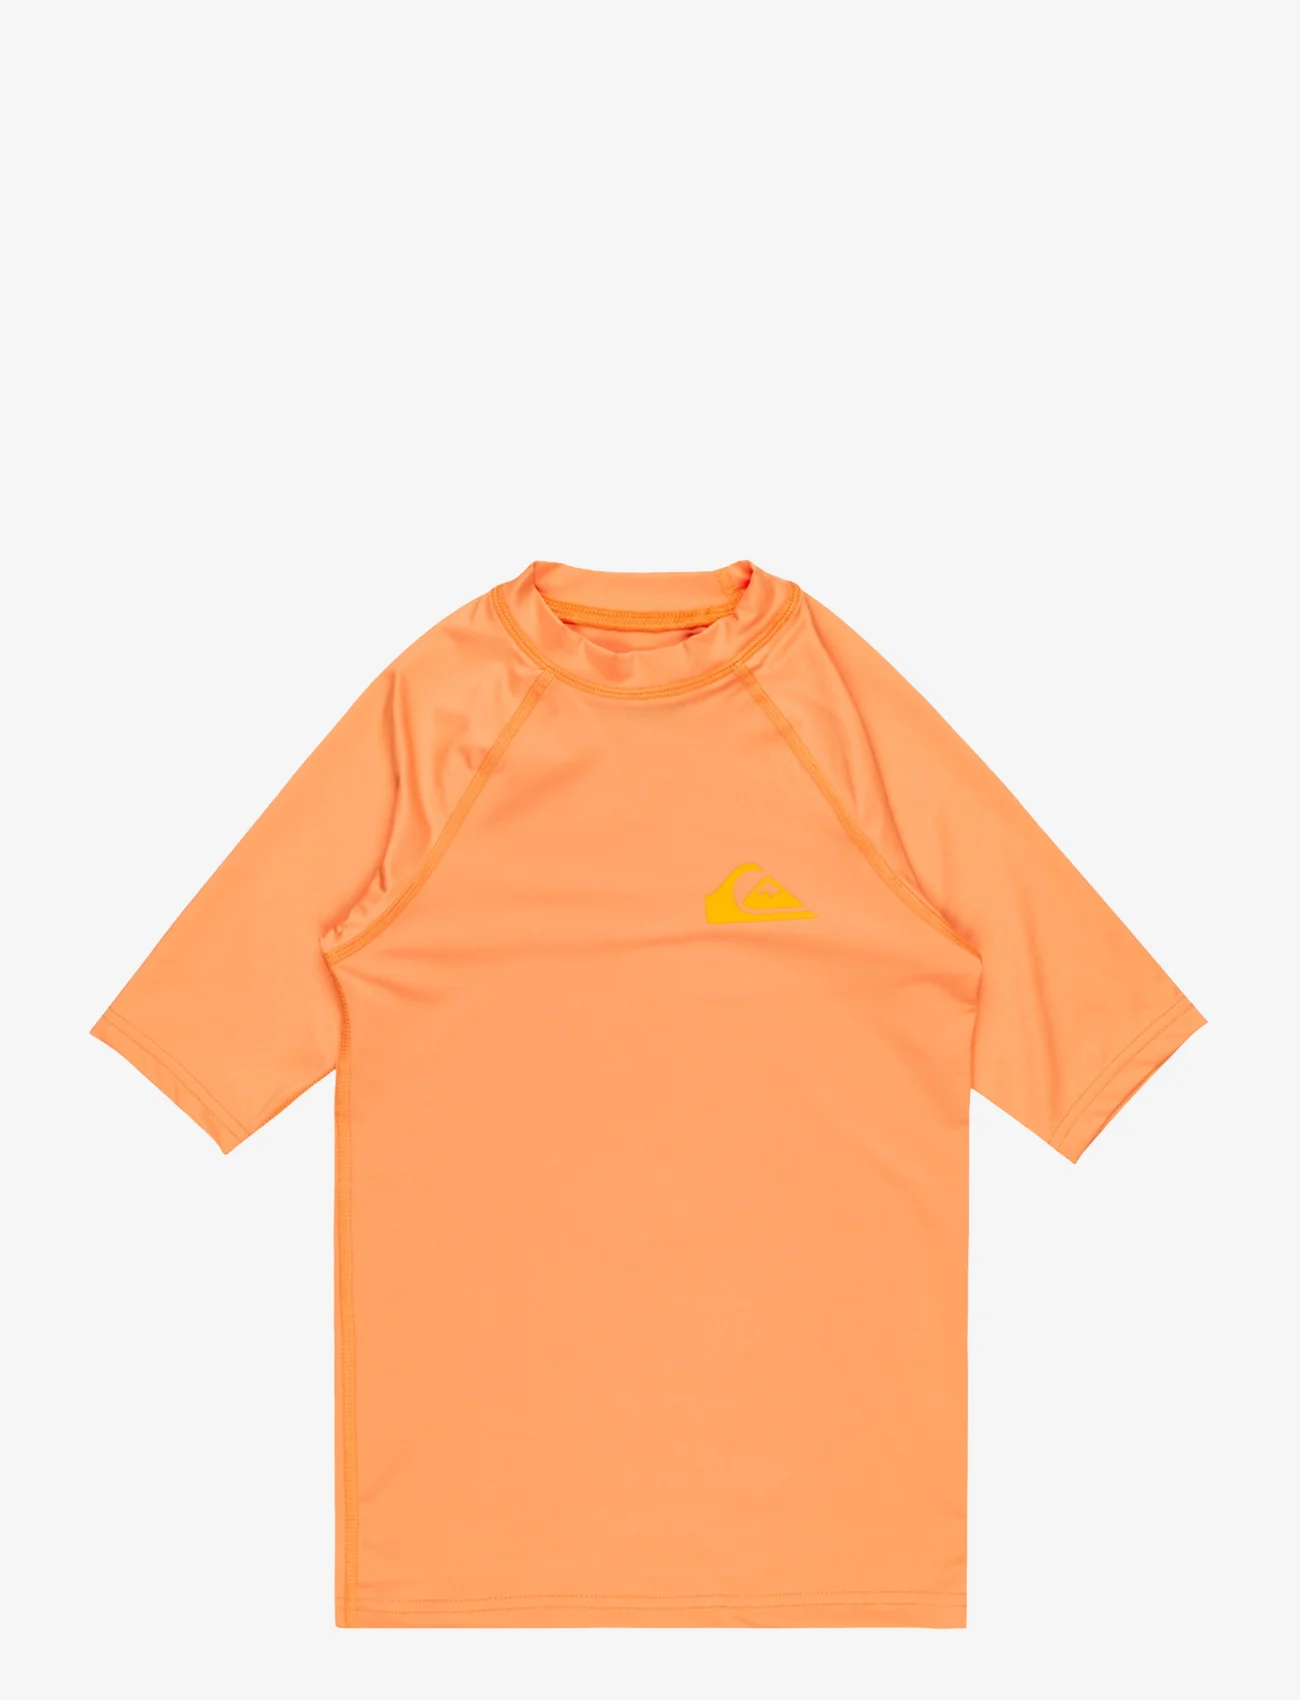 Quiksilver - EVERYDAY UPF50 SS YOUTH - sommarfynd - tangerine - 0